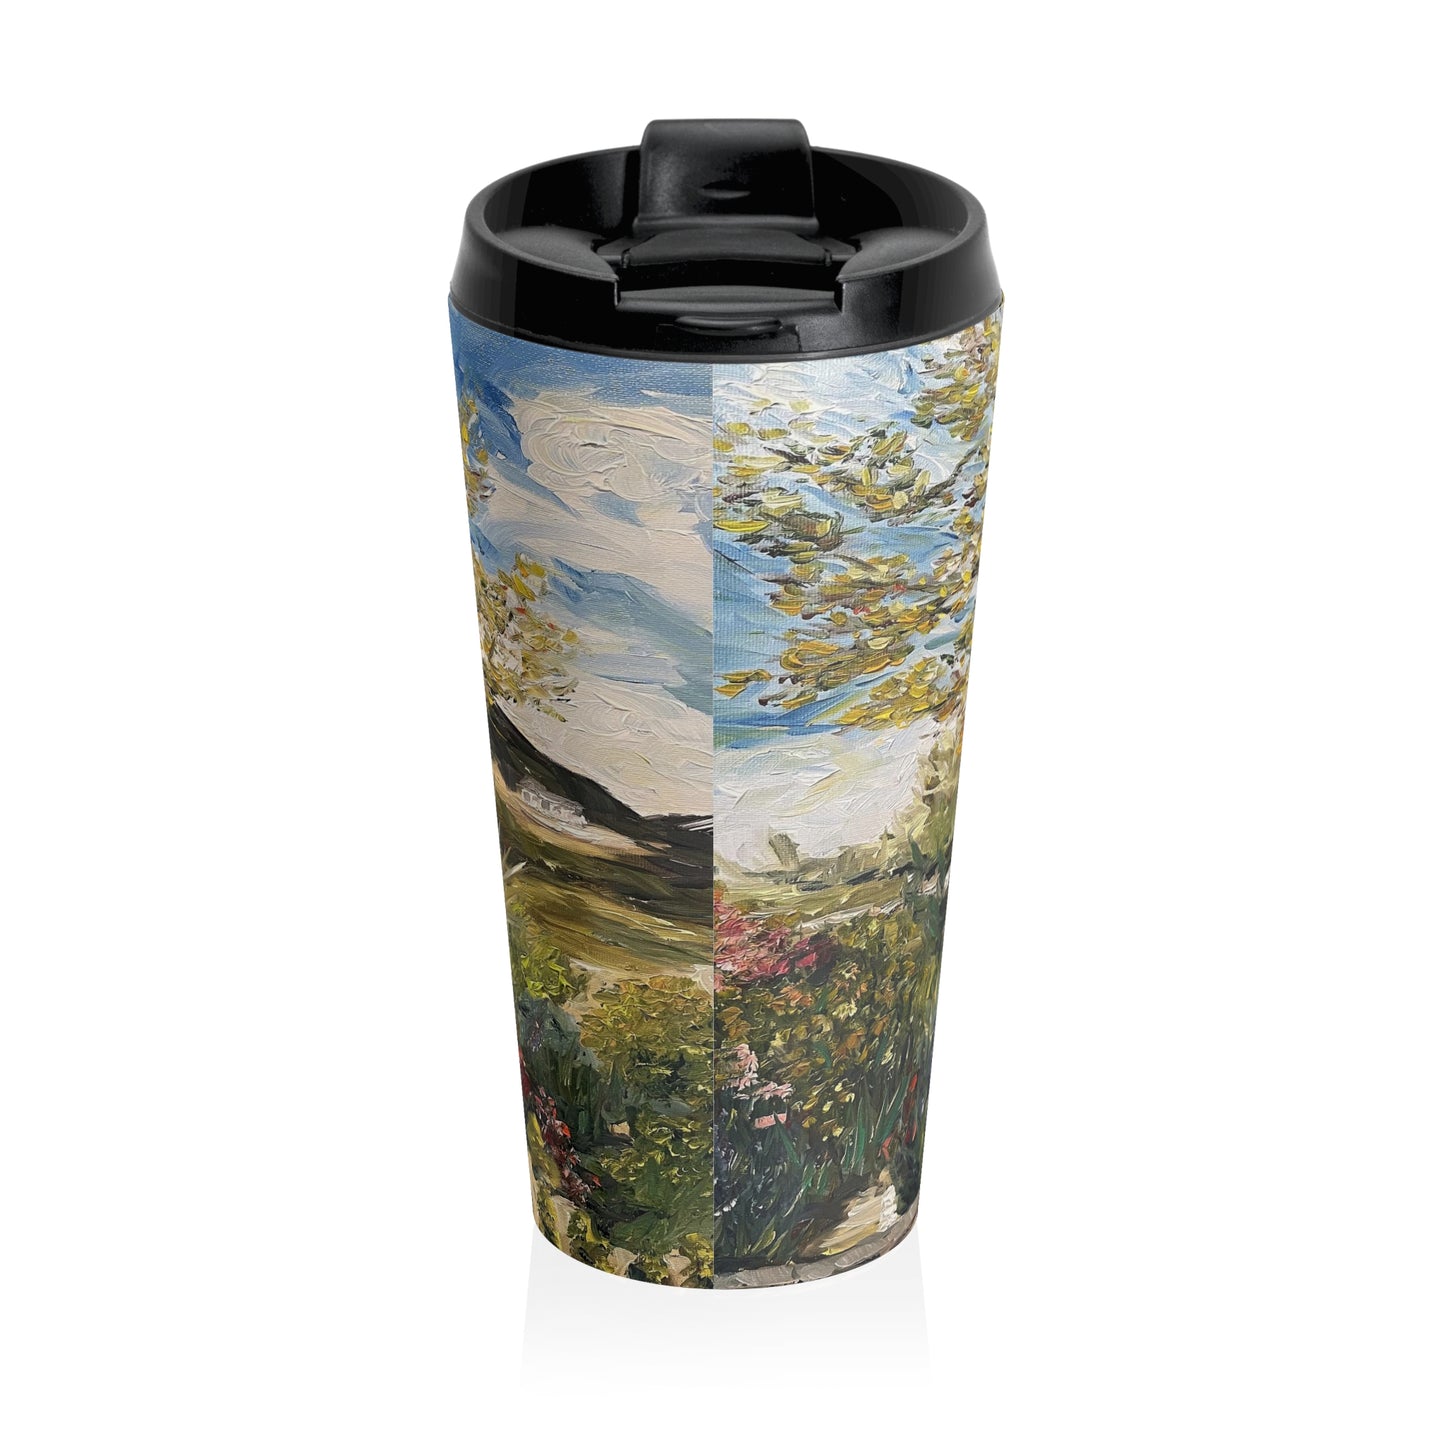 Olive Tree and Garden at GBV Temecula Stainless Steel Travel Mug